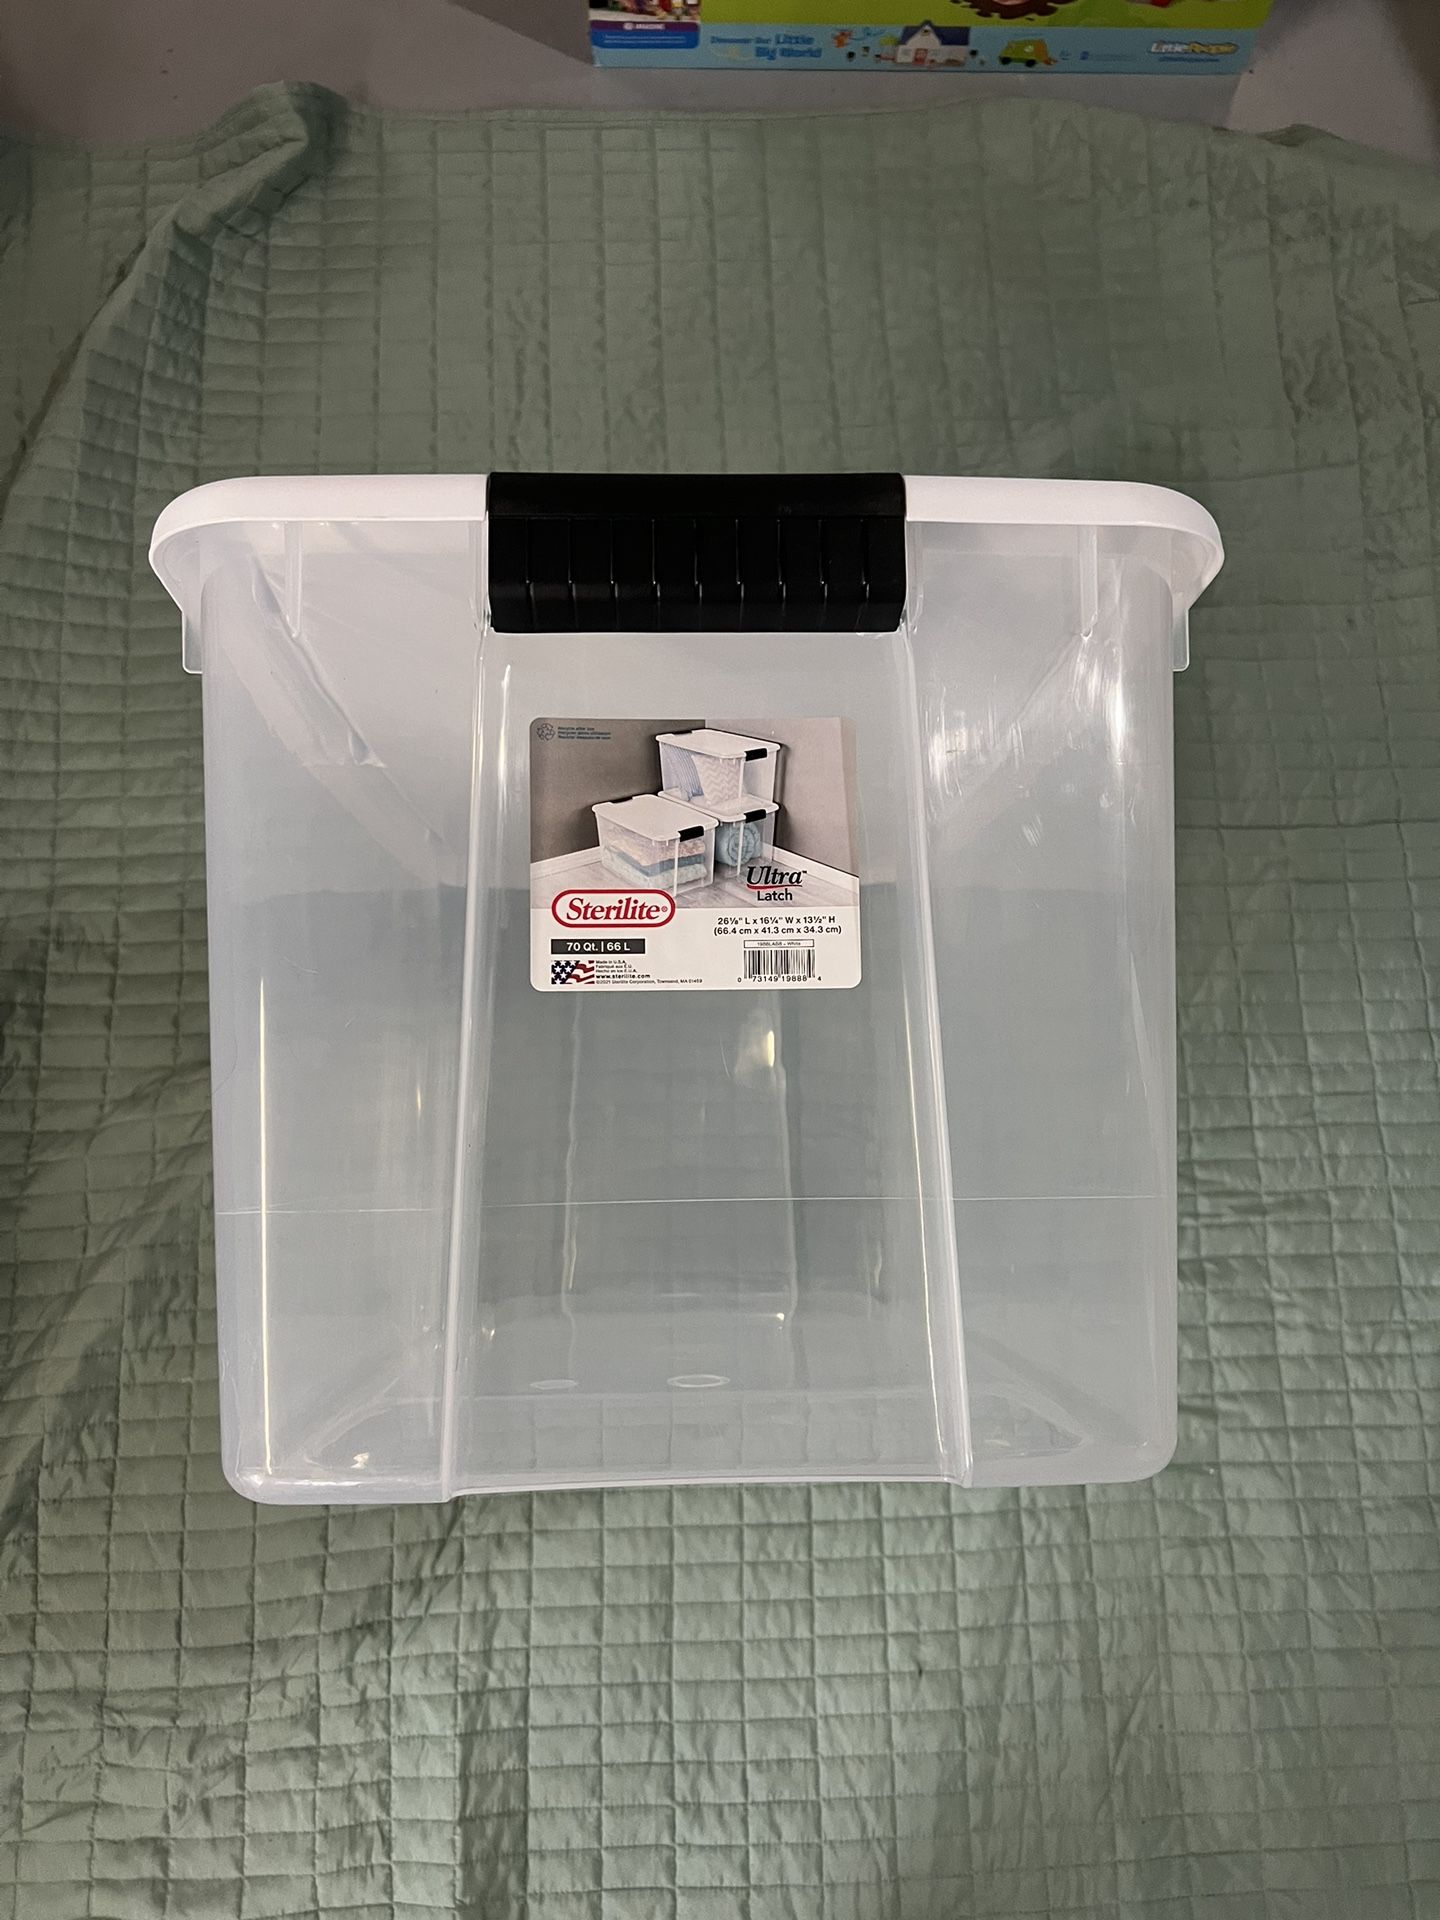 Sterilite 70 Qt Plastic Storage Tub With Latch Lid for Sale in